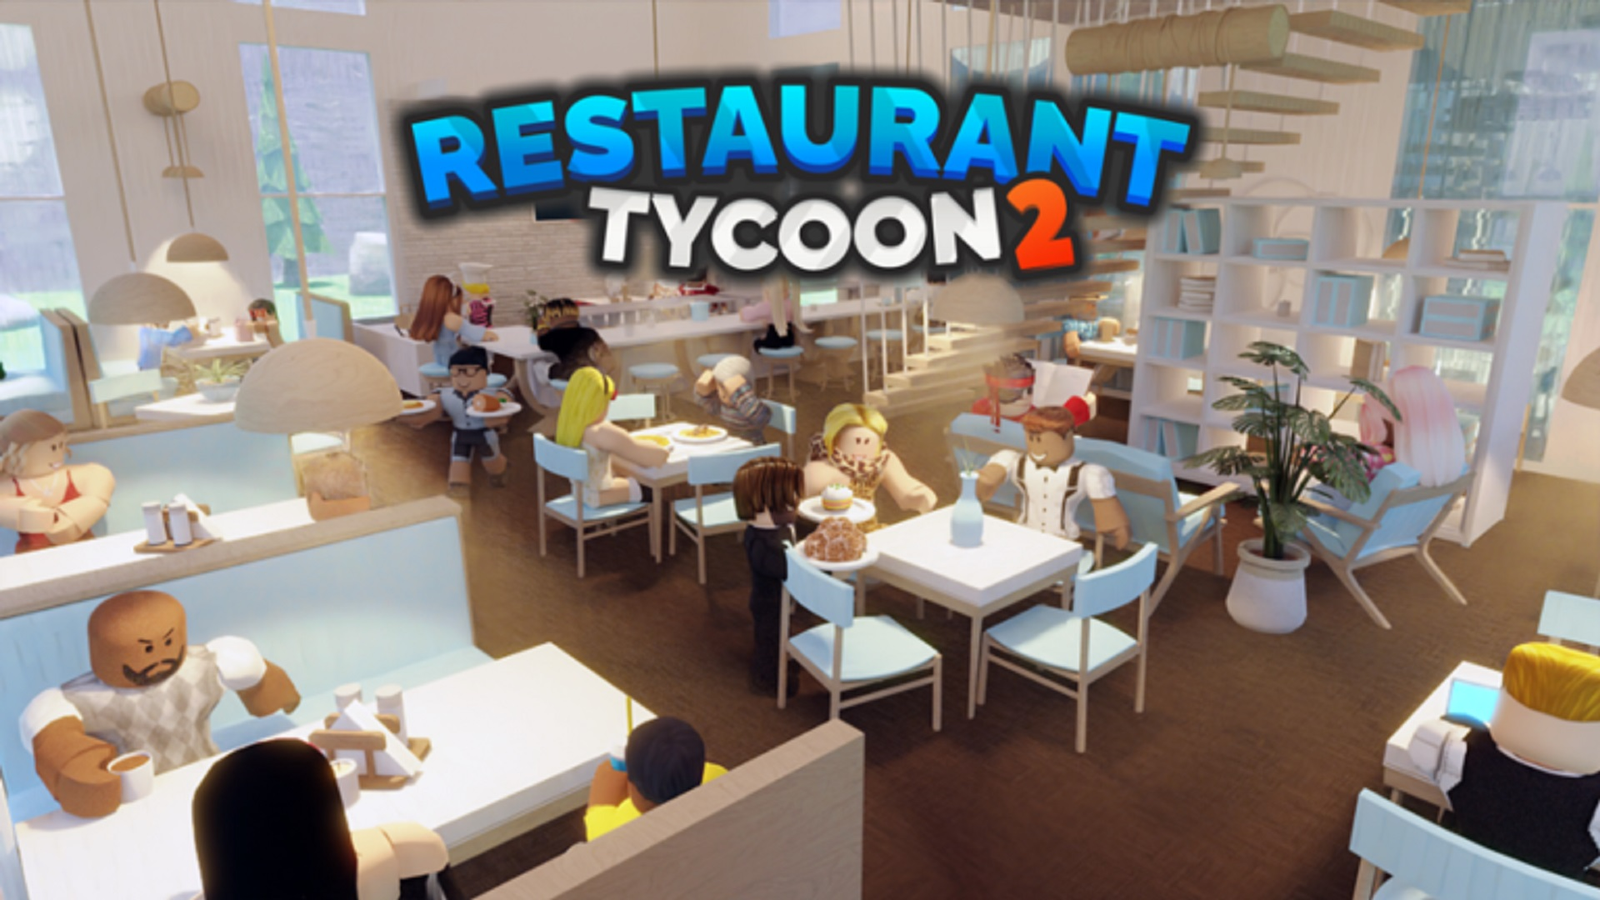 Theme Park Tycoon 2 Codes - Roblox - July 2021 - Mejoress